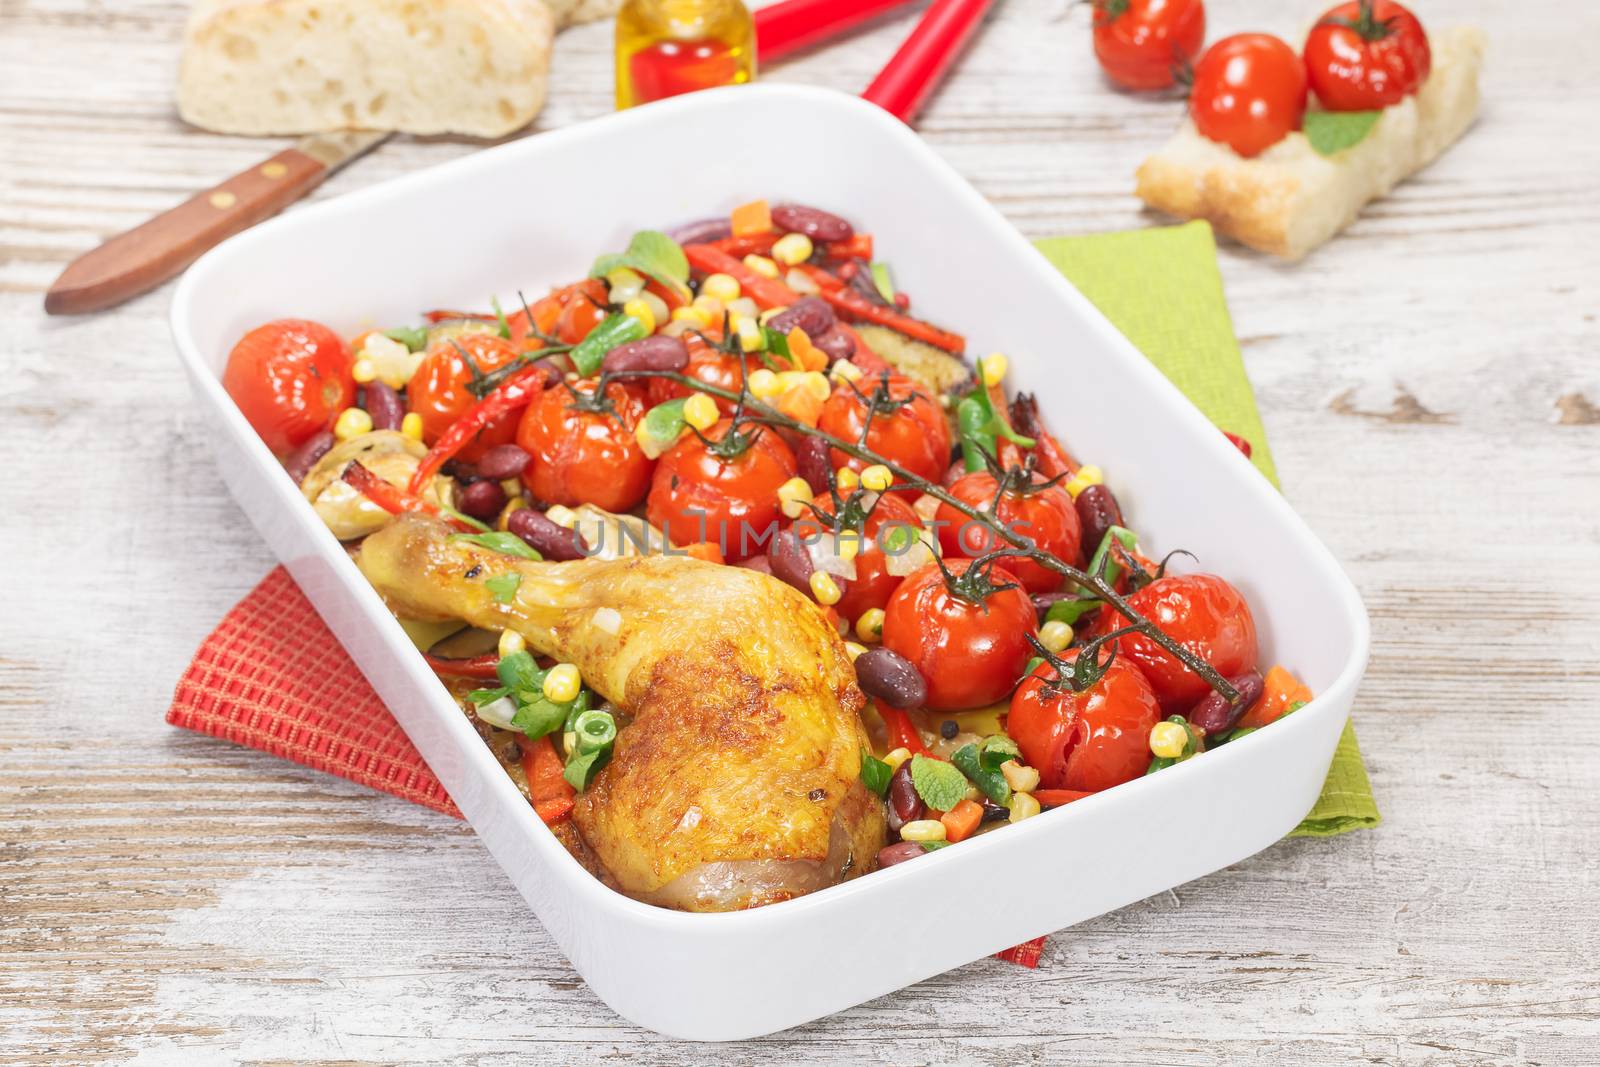 Baked Chicken With Vegetables by Slast20